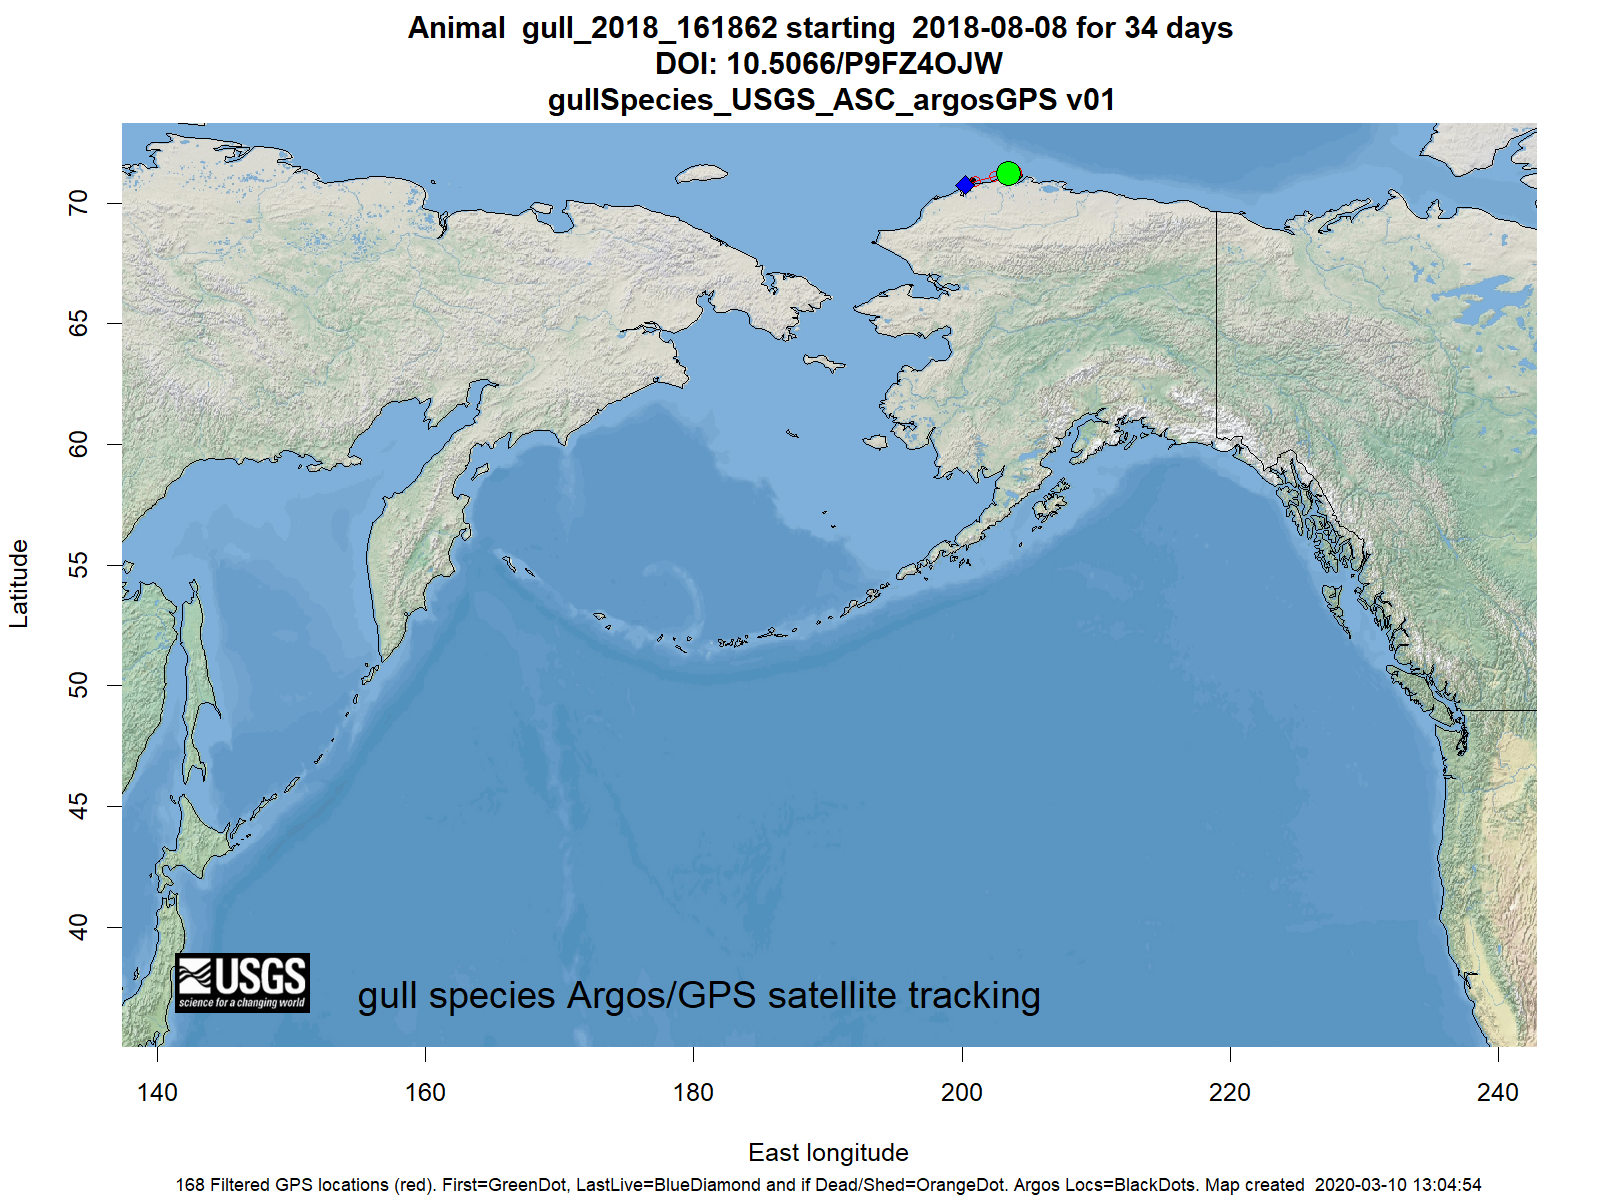 Tracking map for species gull_2018_161862